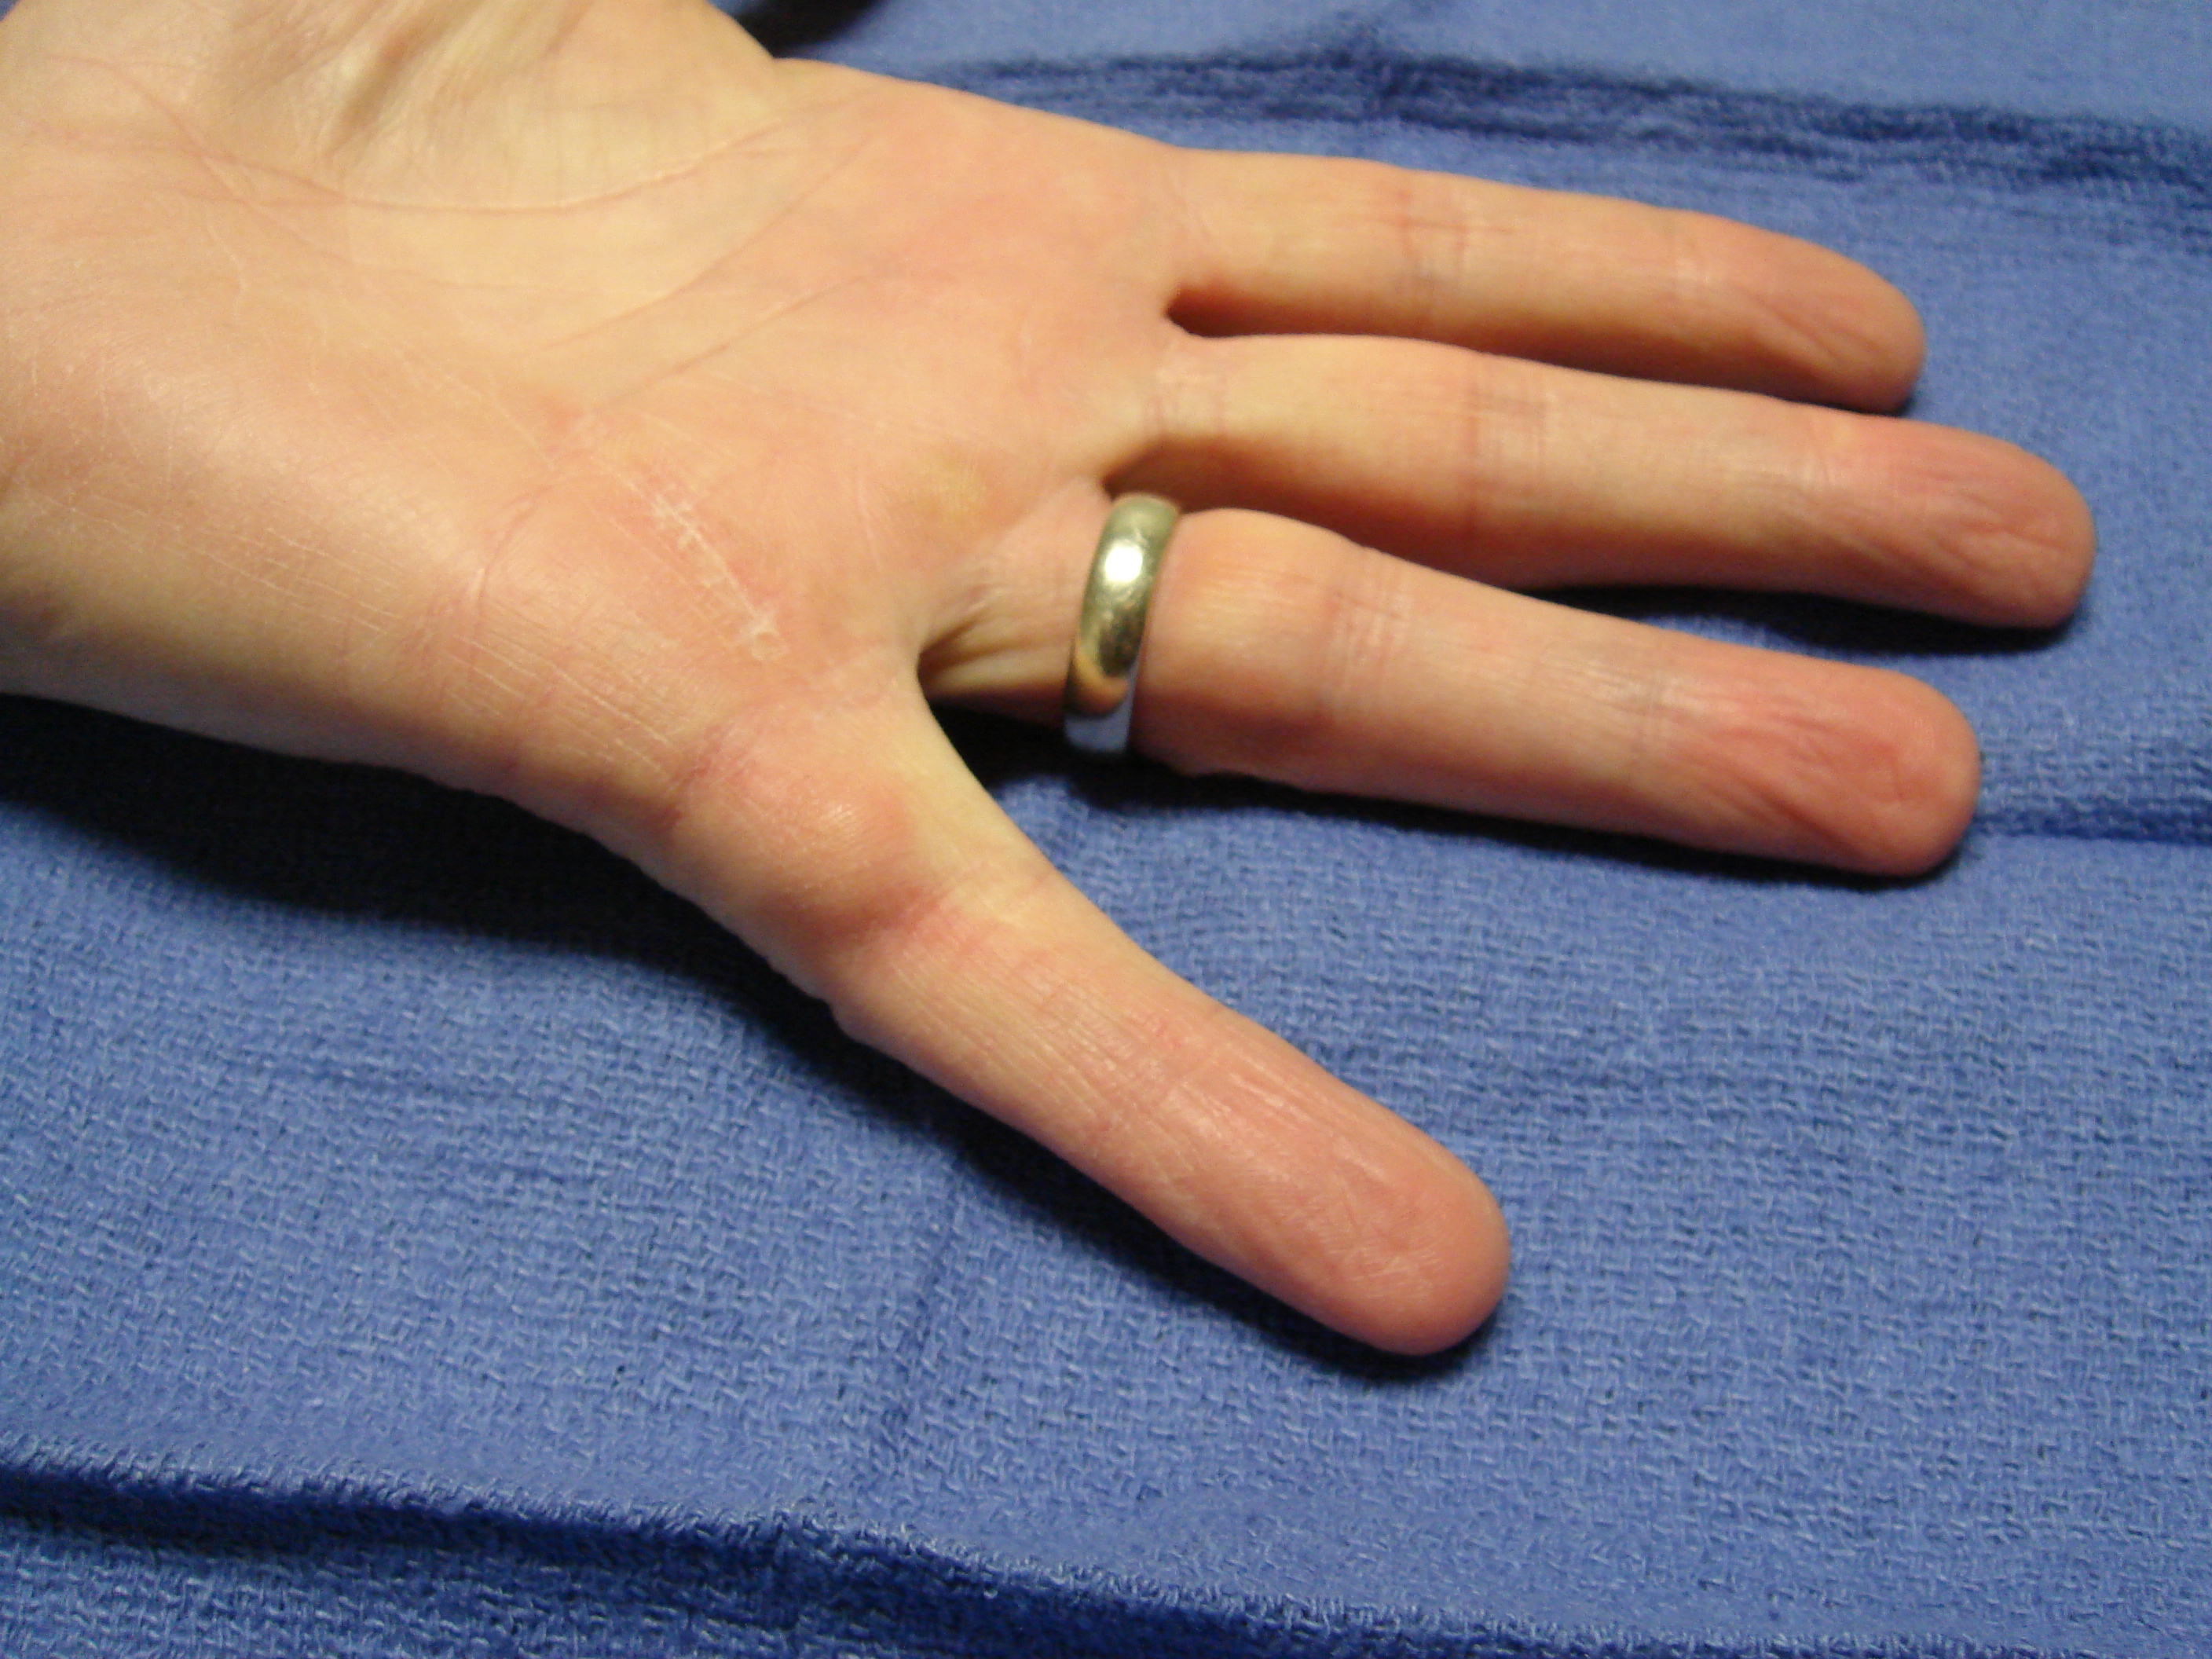 Figure 3d: Six months after collagenase treatment the patient maintains full active motion. A proximal phalangeal fascial nodule is seen slightly enlarged from pre-treatment; but there is yet no new contracture.